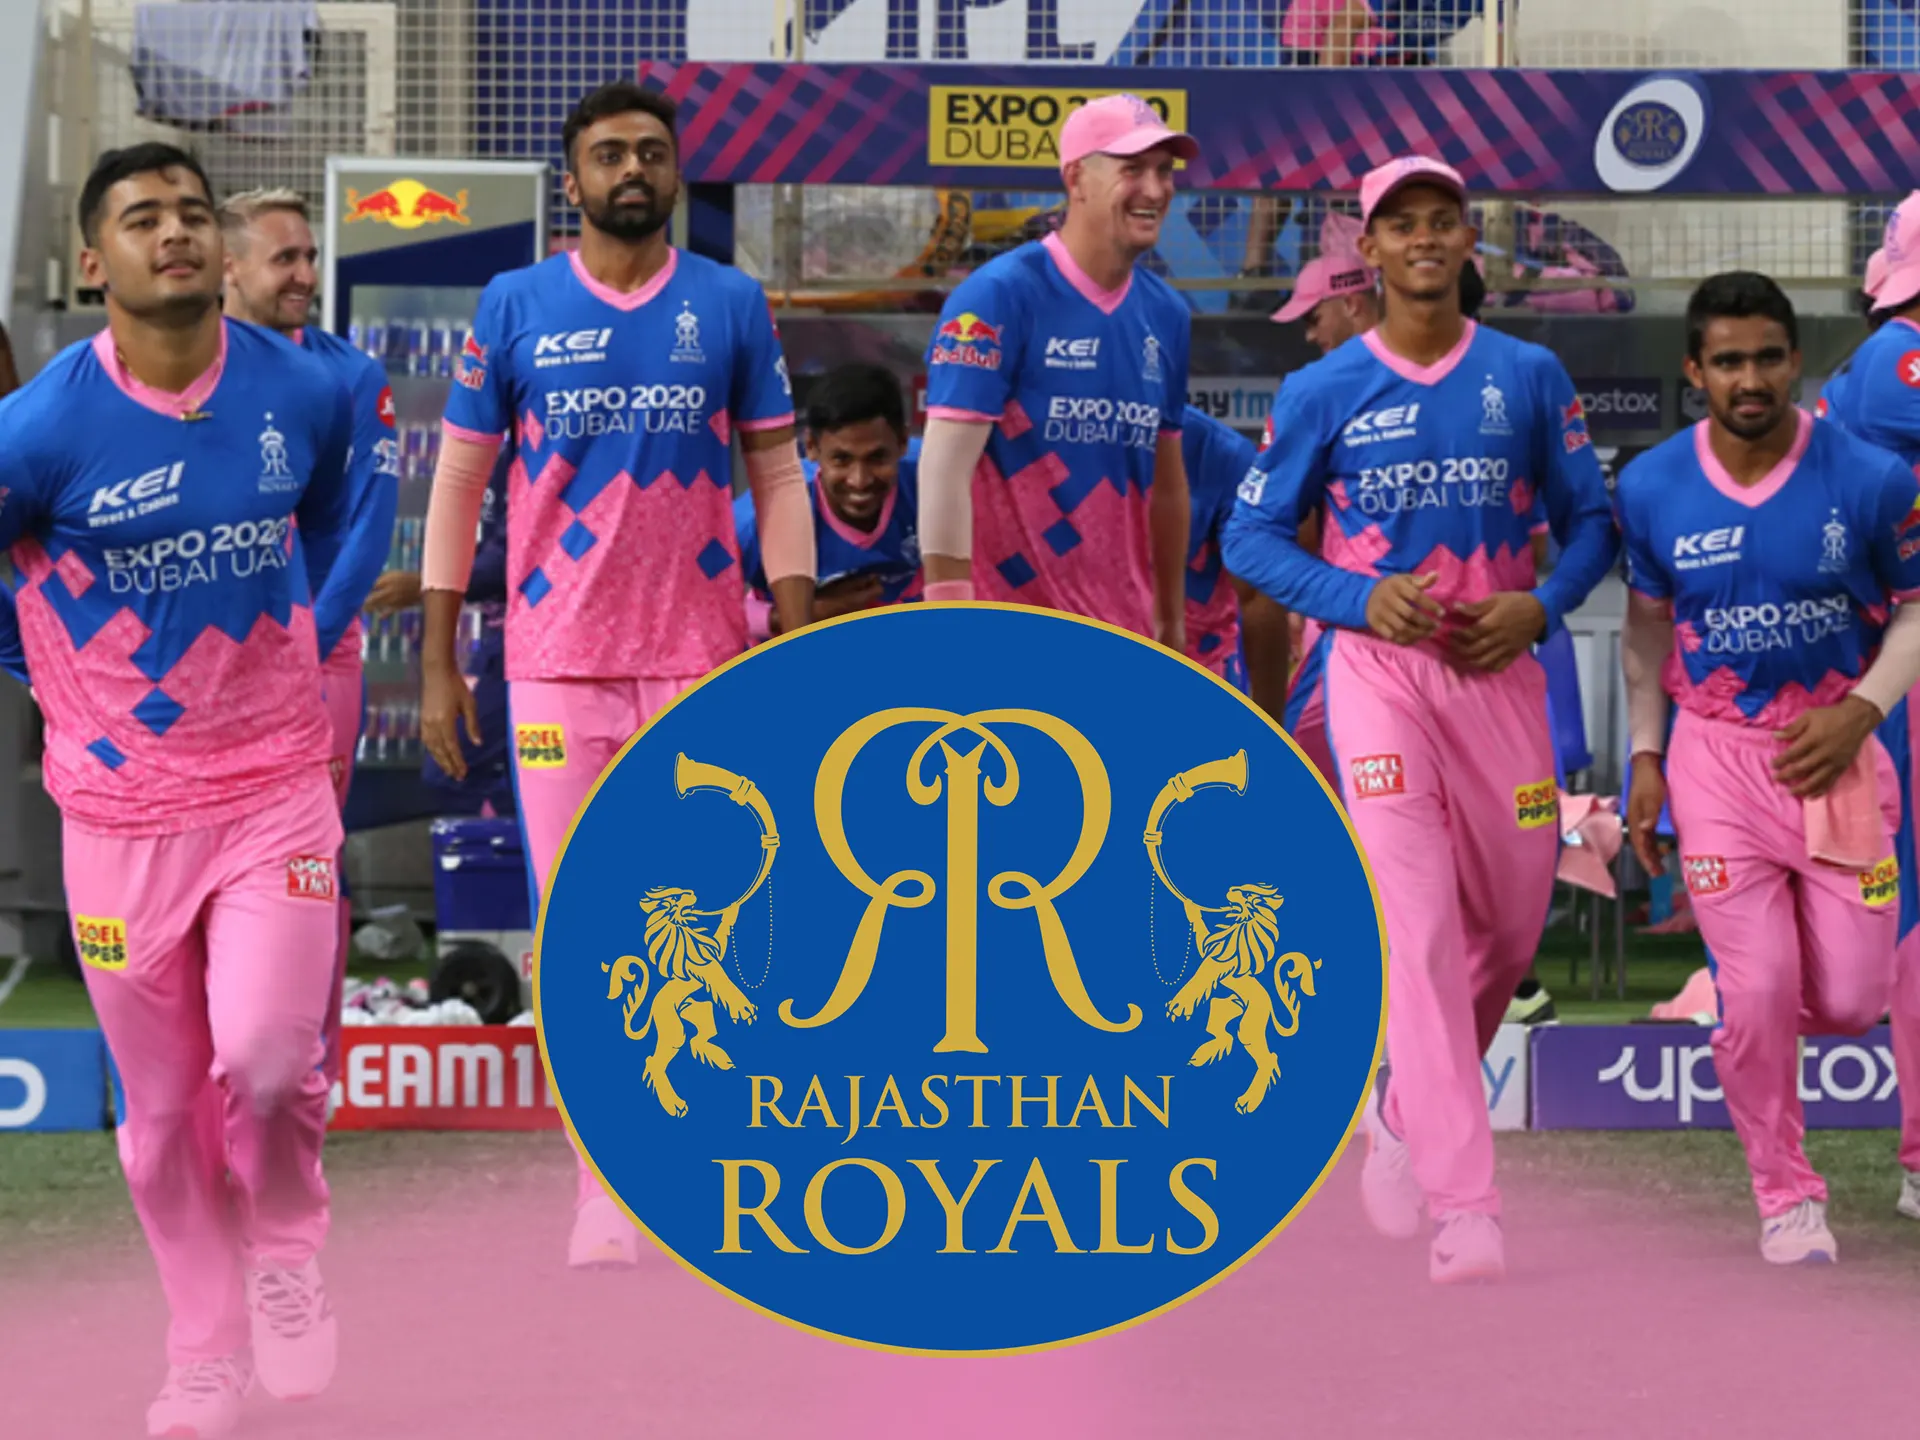 Rajastan Royals team can show you intresting matches.